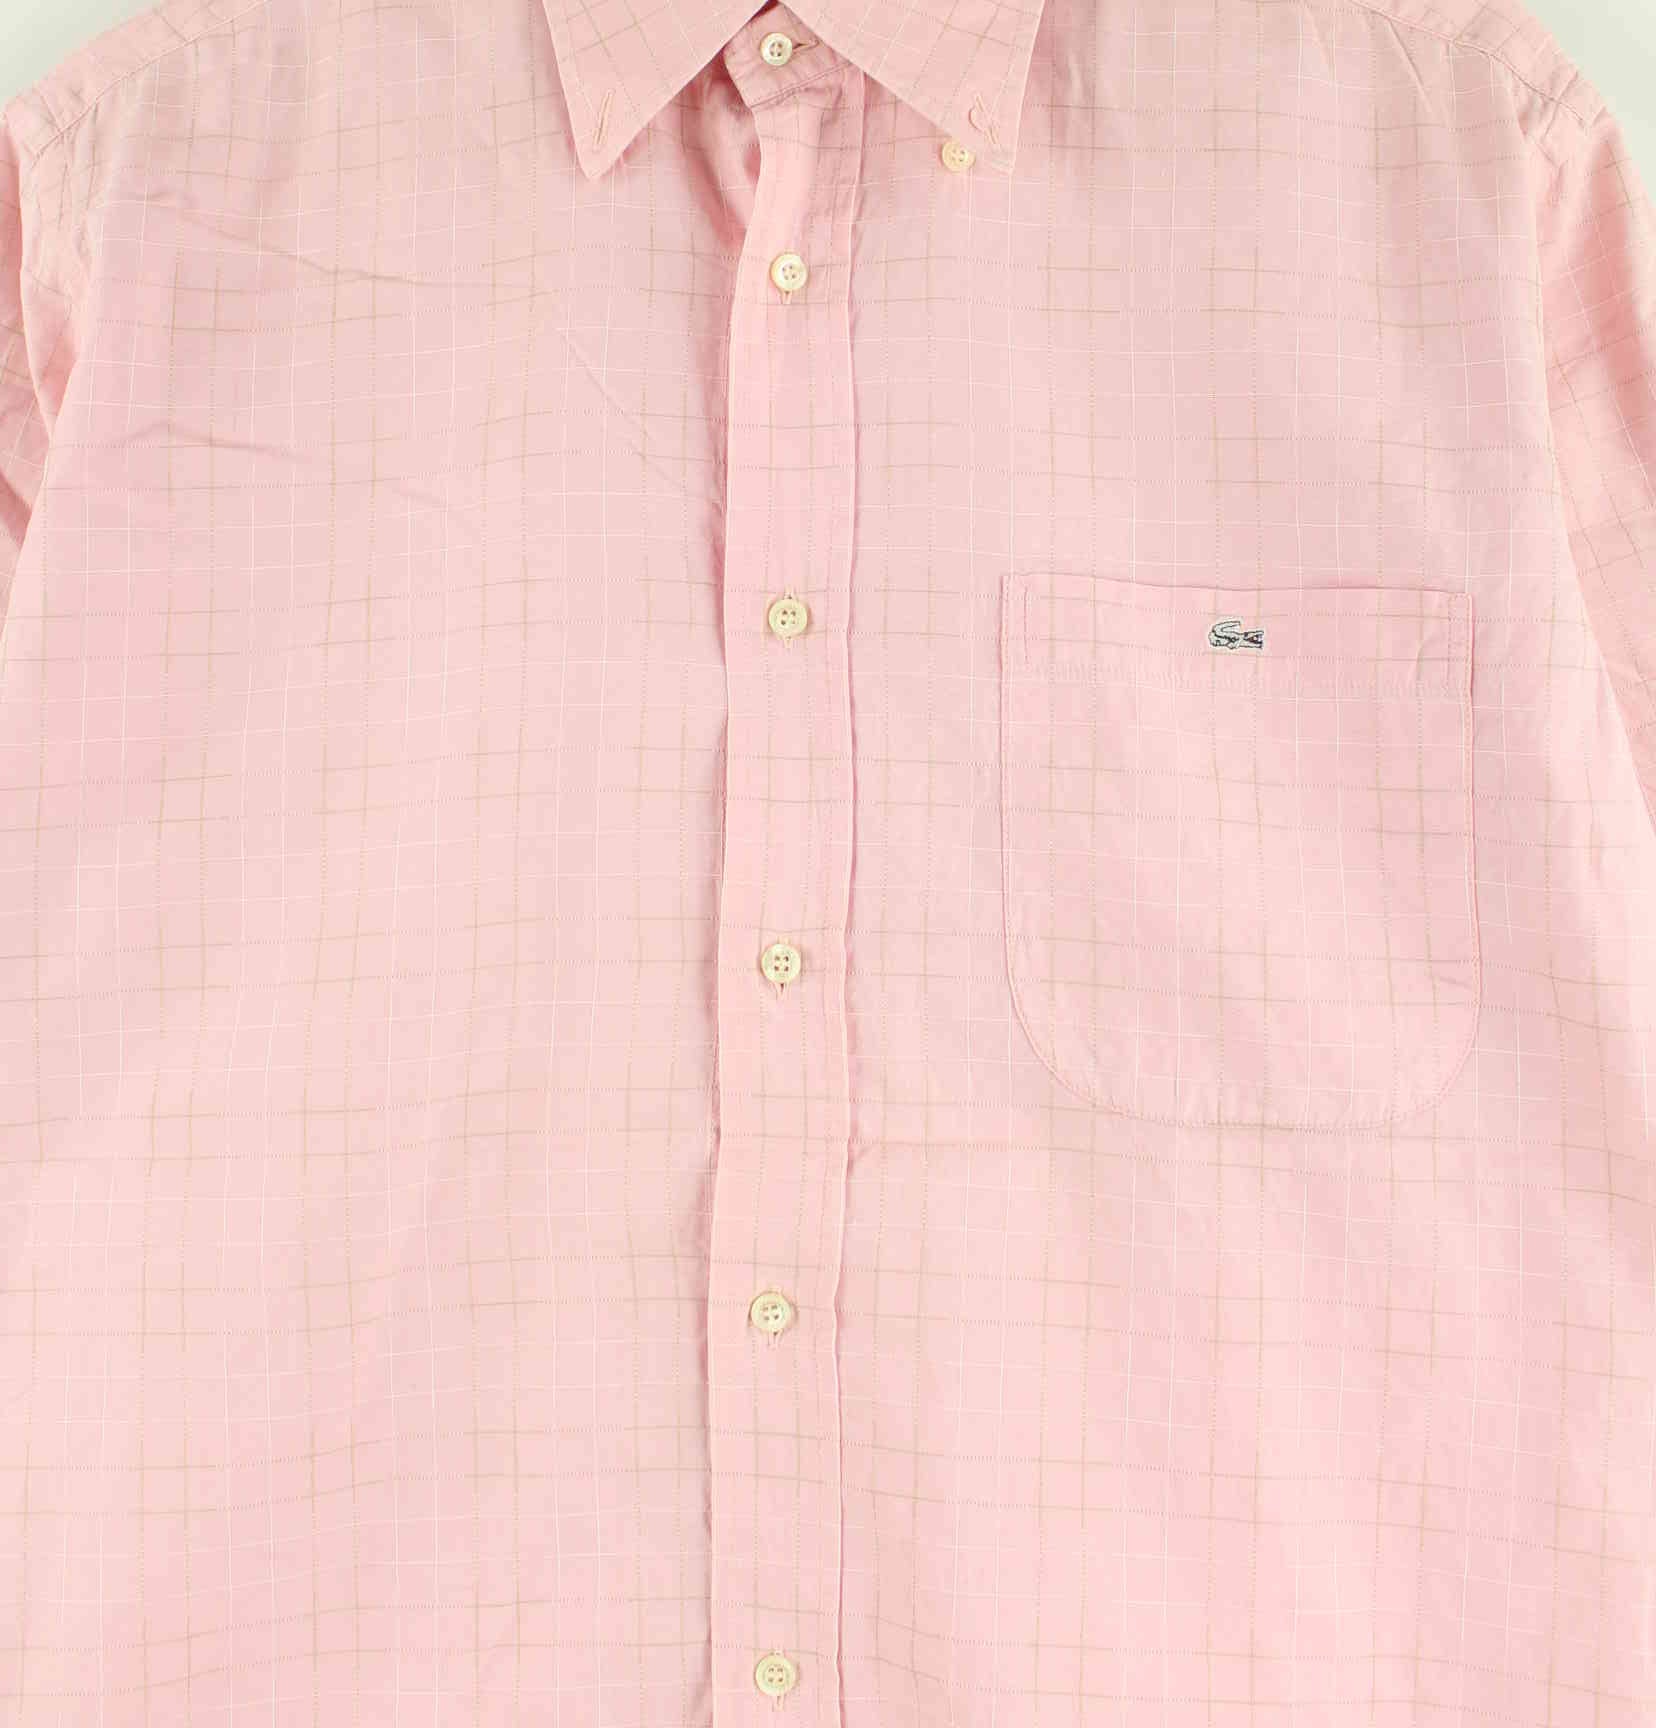 Lacoste Striped Hemd Pink XL (detail image 1)